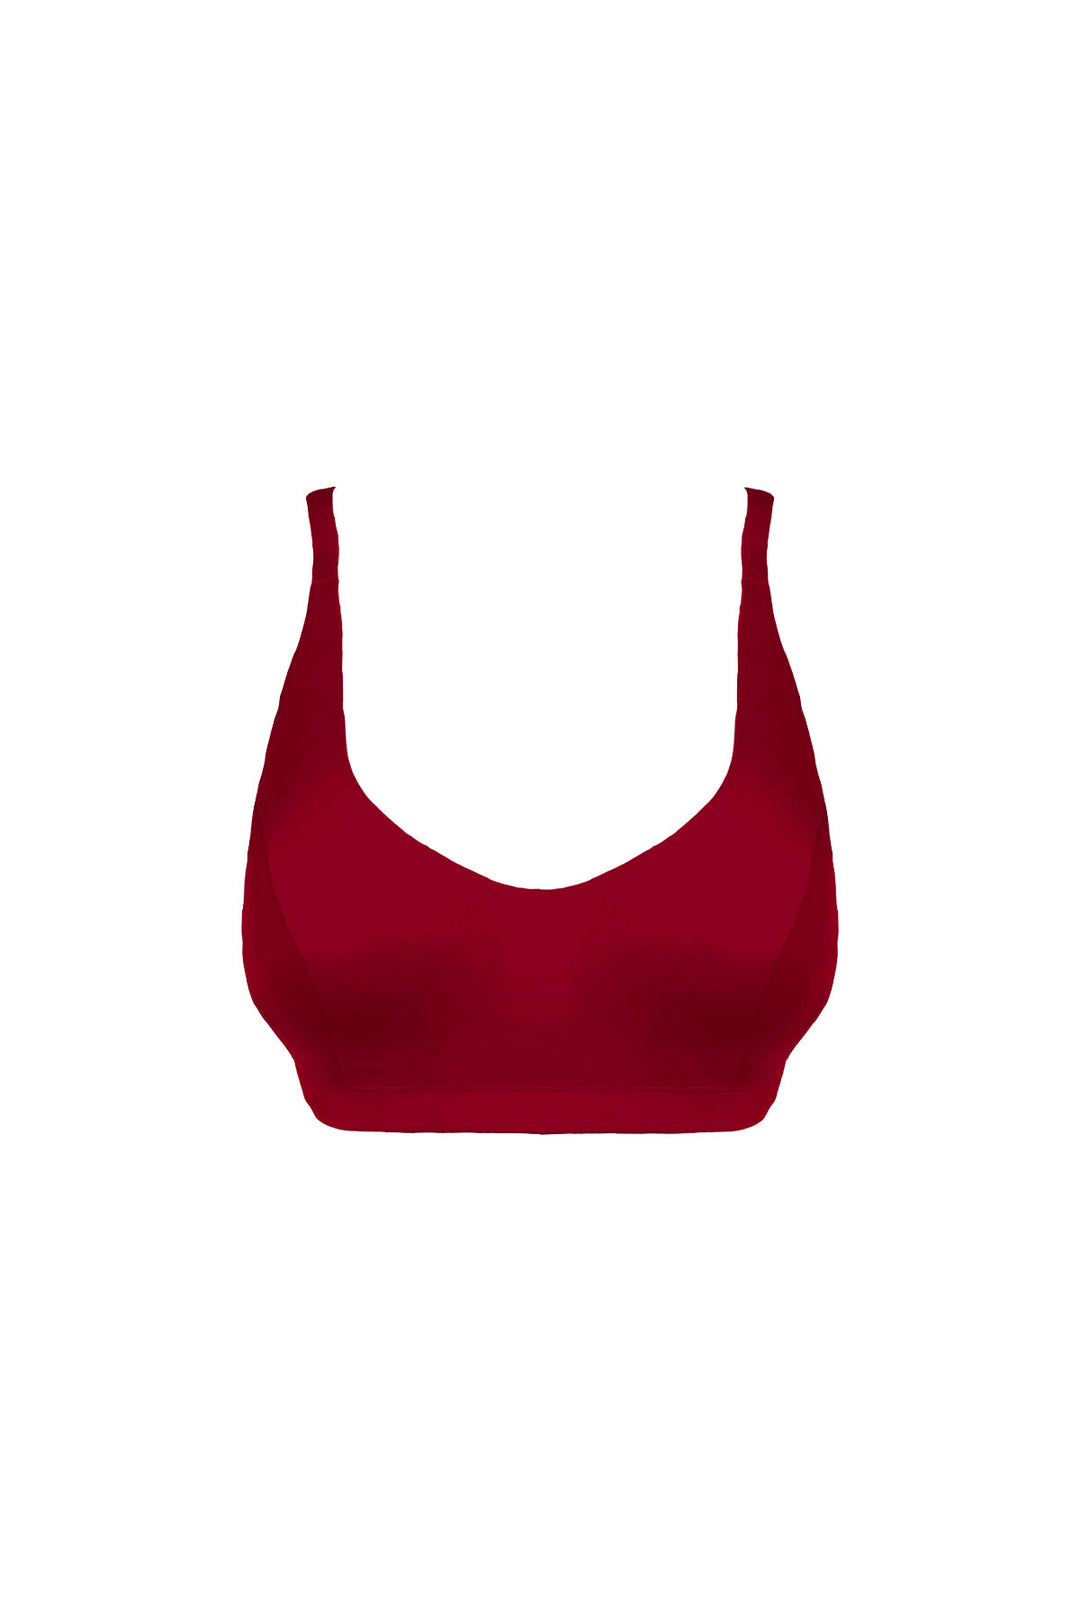 SOLD OUT Siane Full Cup Bralette in Garnet